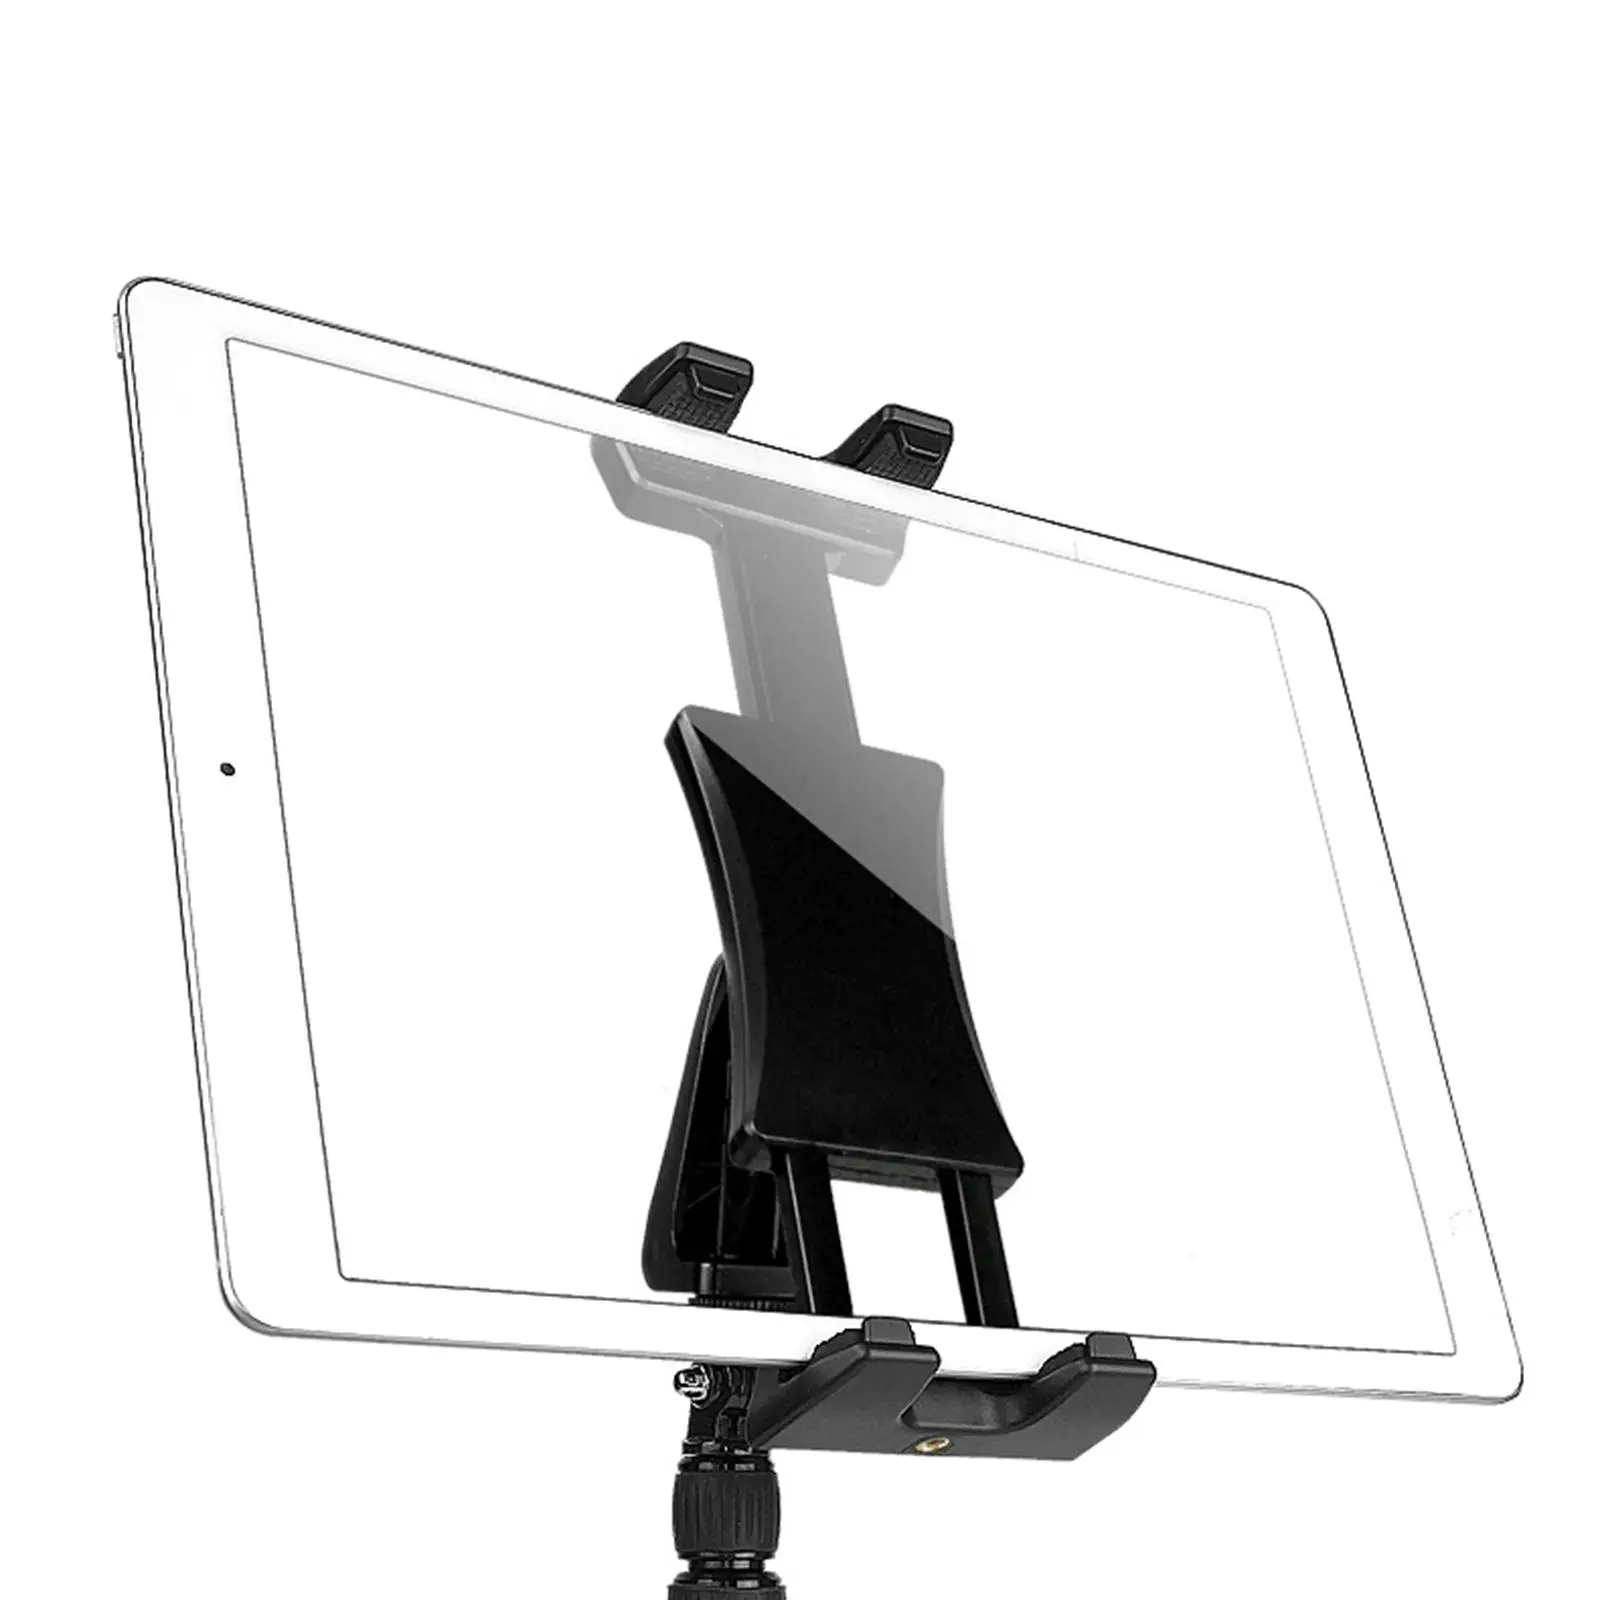 Universal Mount Tablet for 5-13.5 inch Tablet, Cell Phone Holder for Smartphone Tablet Mount Holder Stand for iPad Pro/Air/Mini